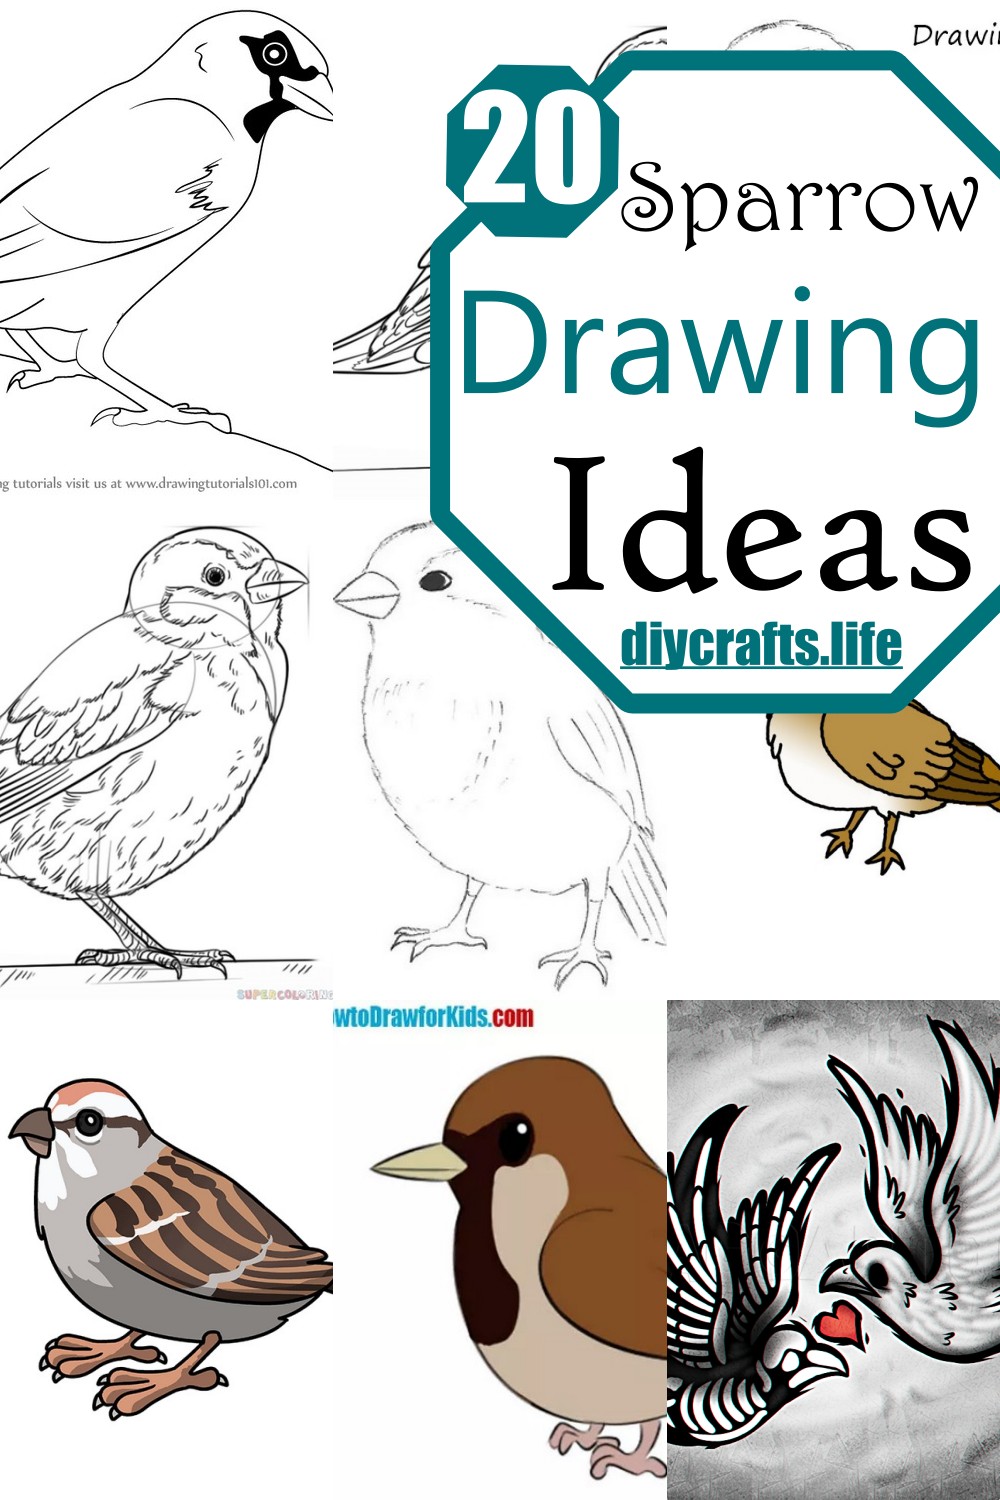 Sparrow Drawing Ideas